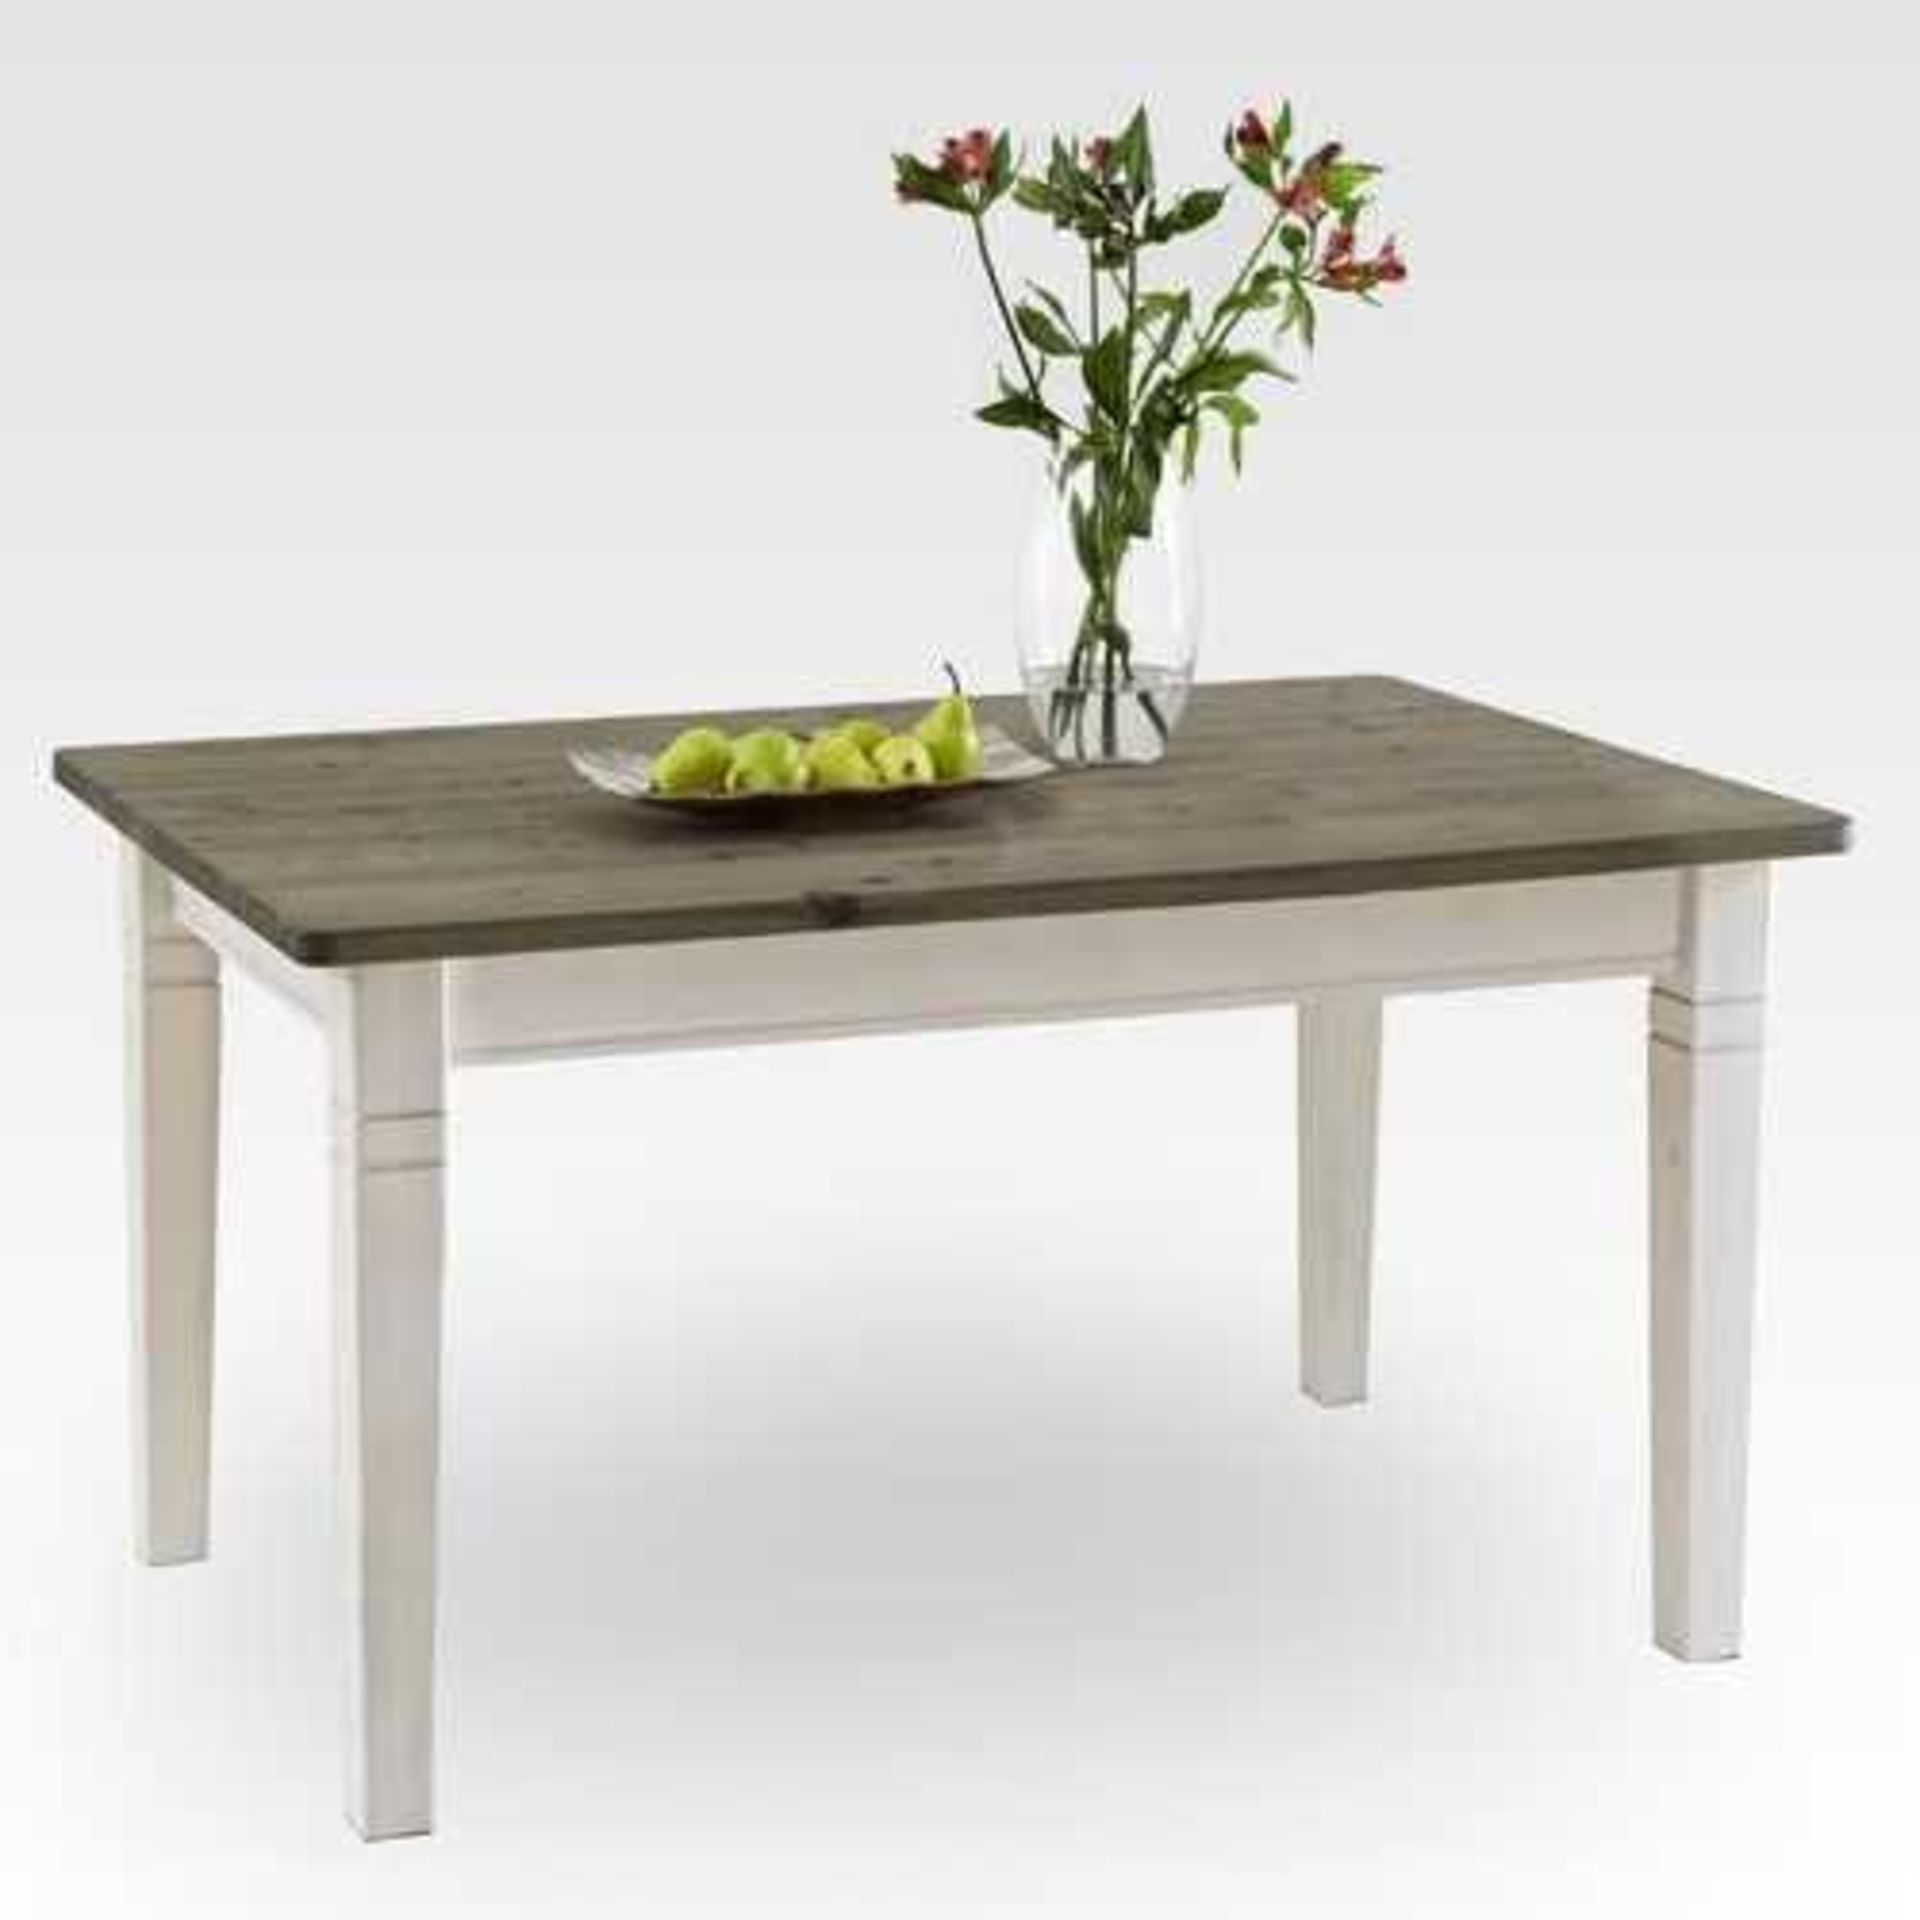 Boxed August Grove Kelly Dining Table RRP £305 (18349)(Appraisals Available On Request) (Pictures